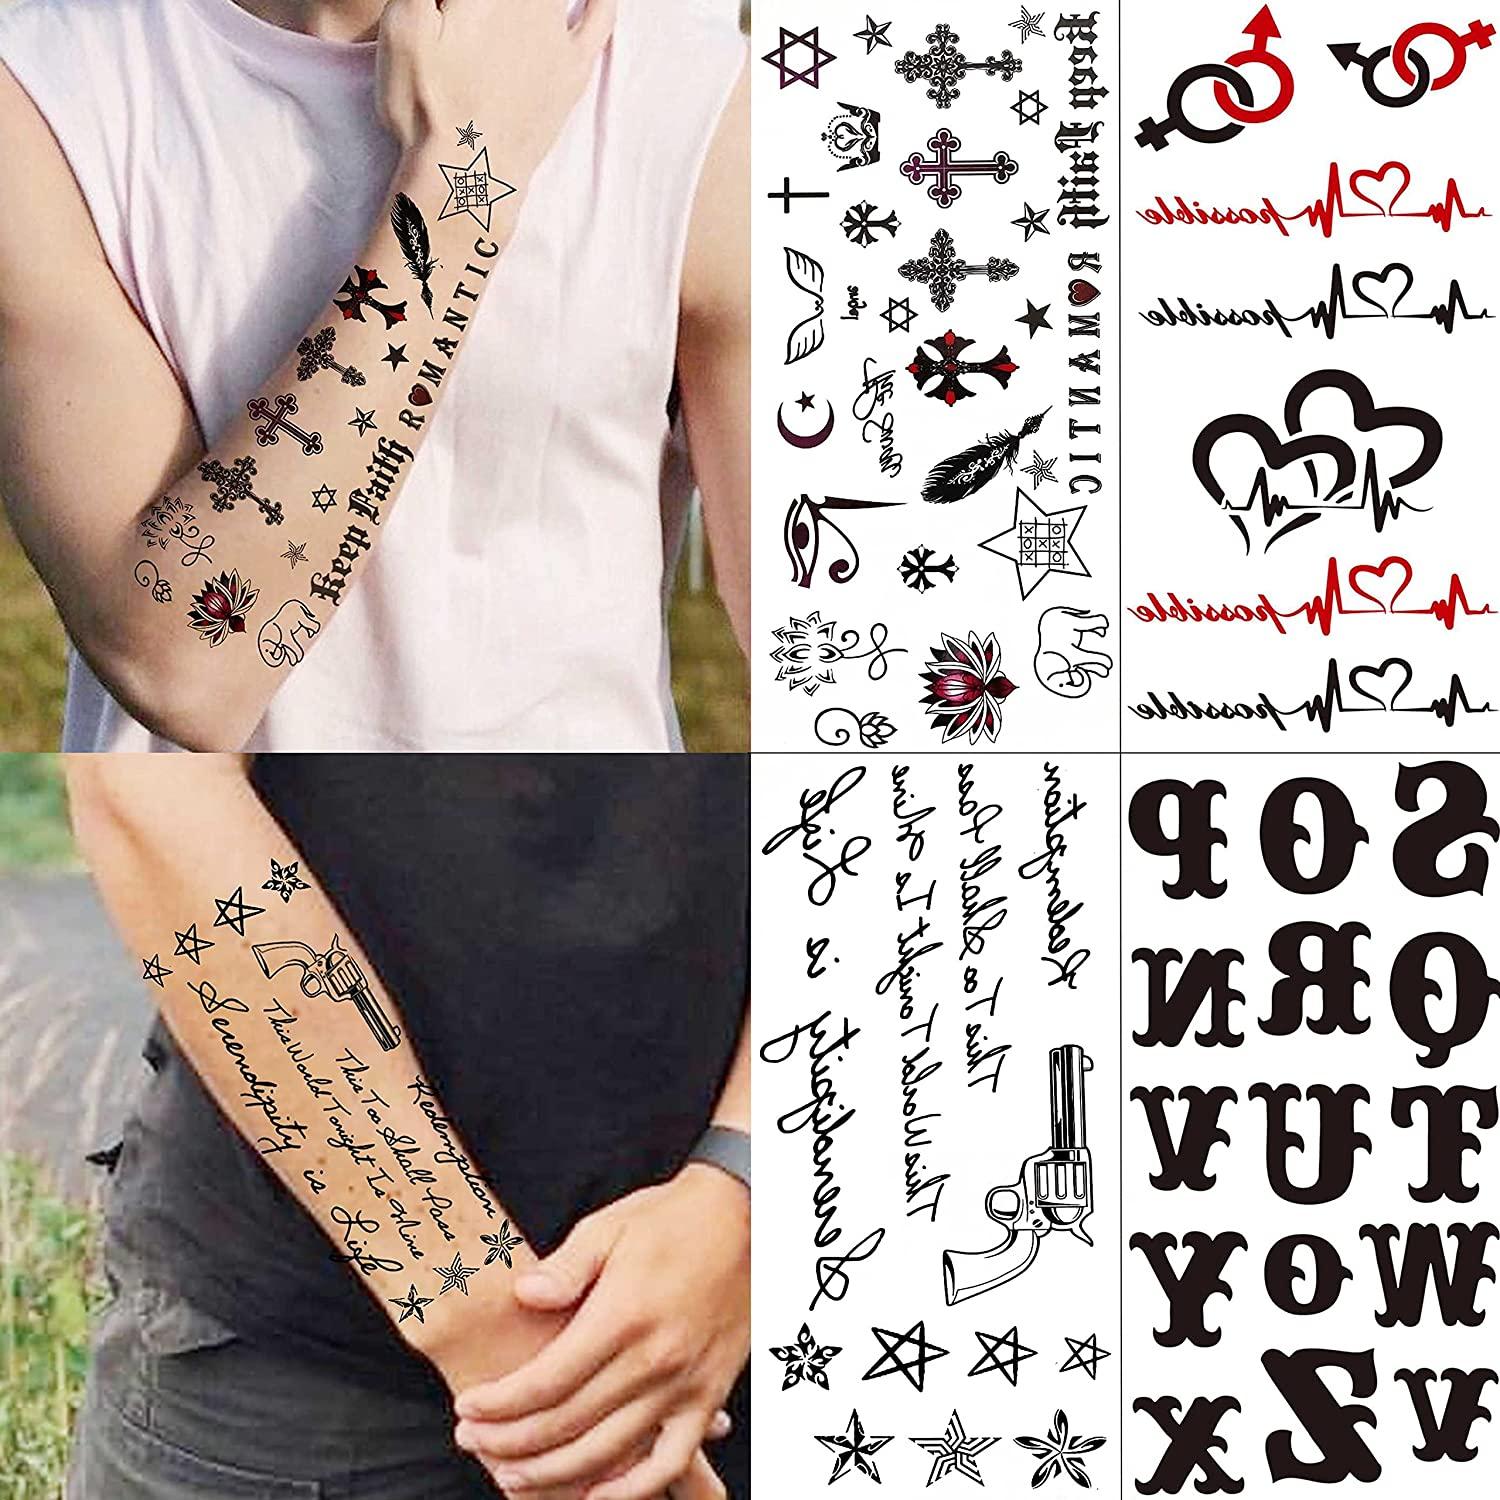 word tattoo designs for men on forearm